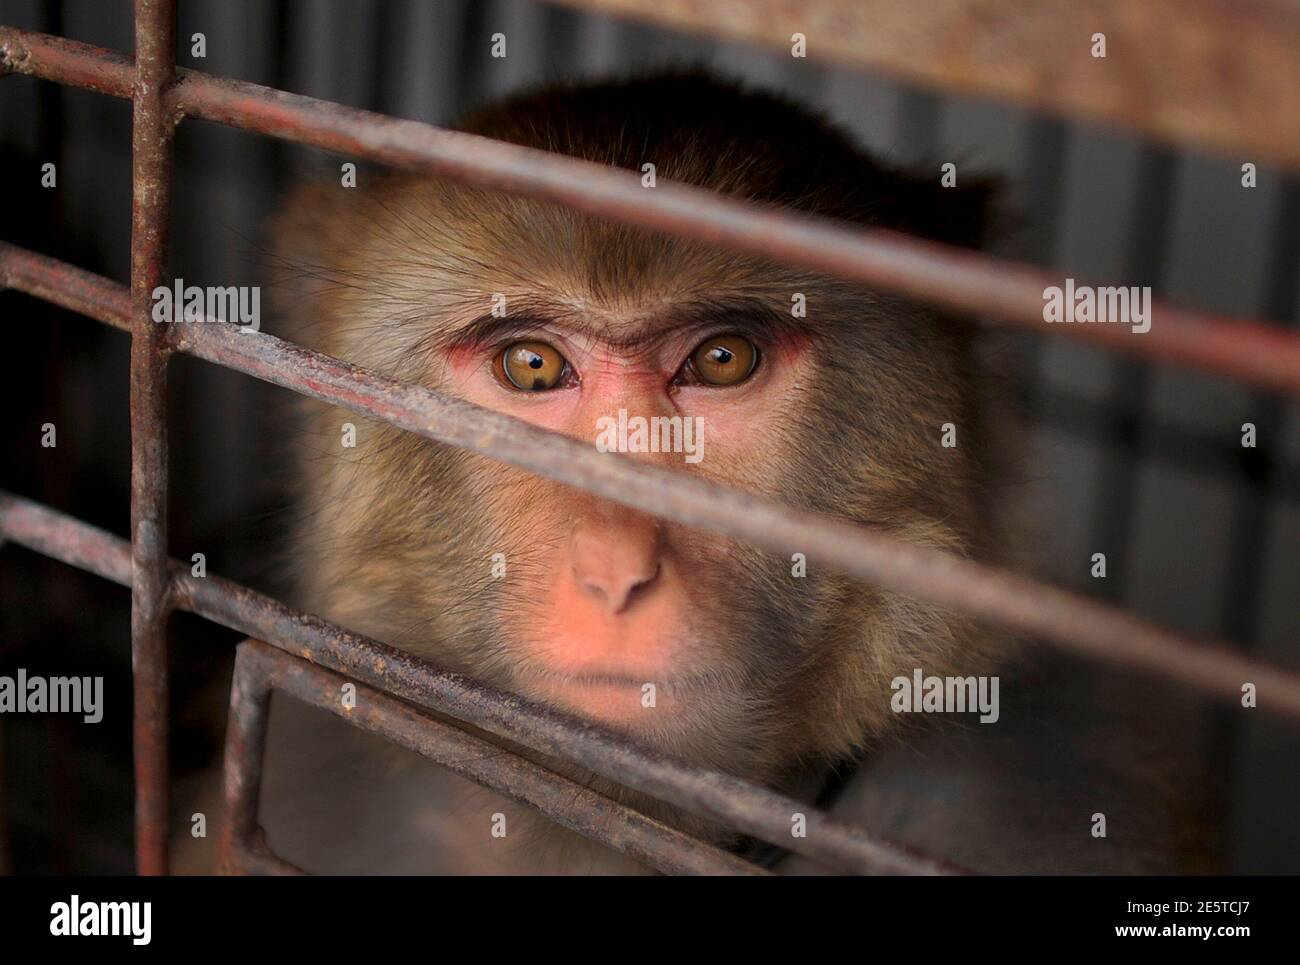 A macaque looks out from a cage in a village of Suzhou, Anhui province  October 30, 2012. Thousands of animals are raised and trained by over 300  circus groups in Suzhou, where